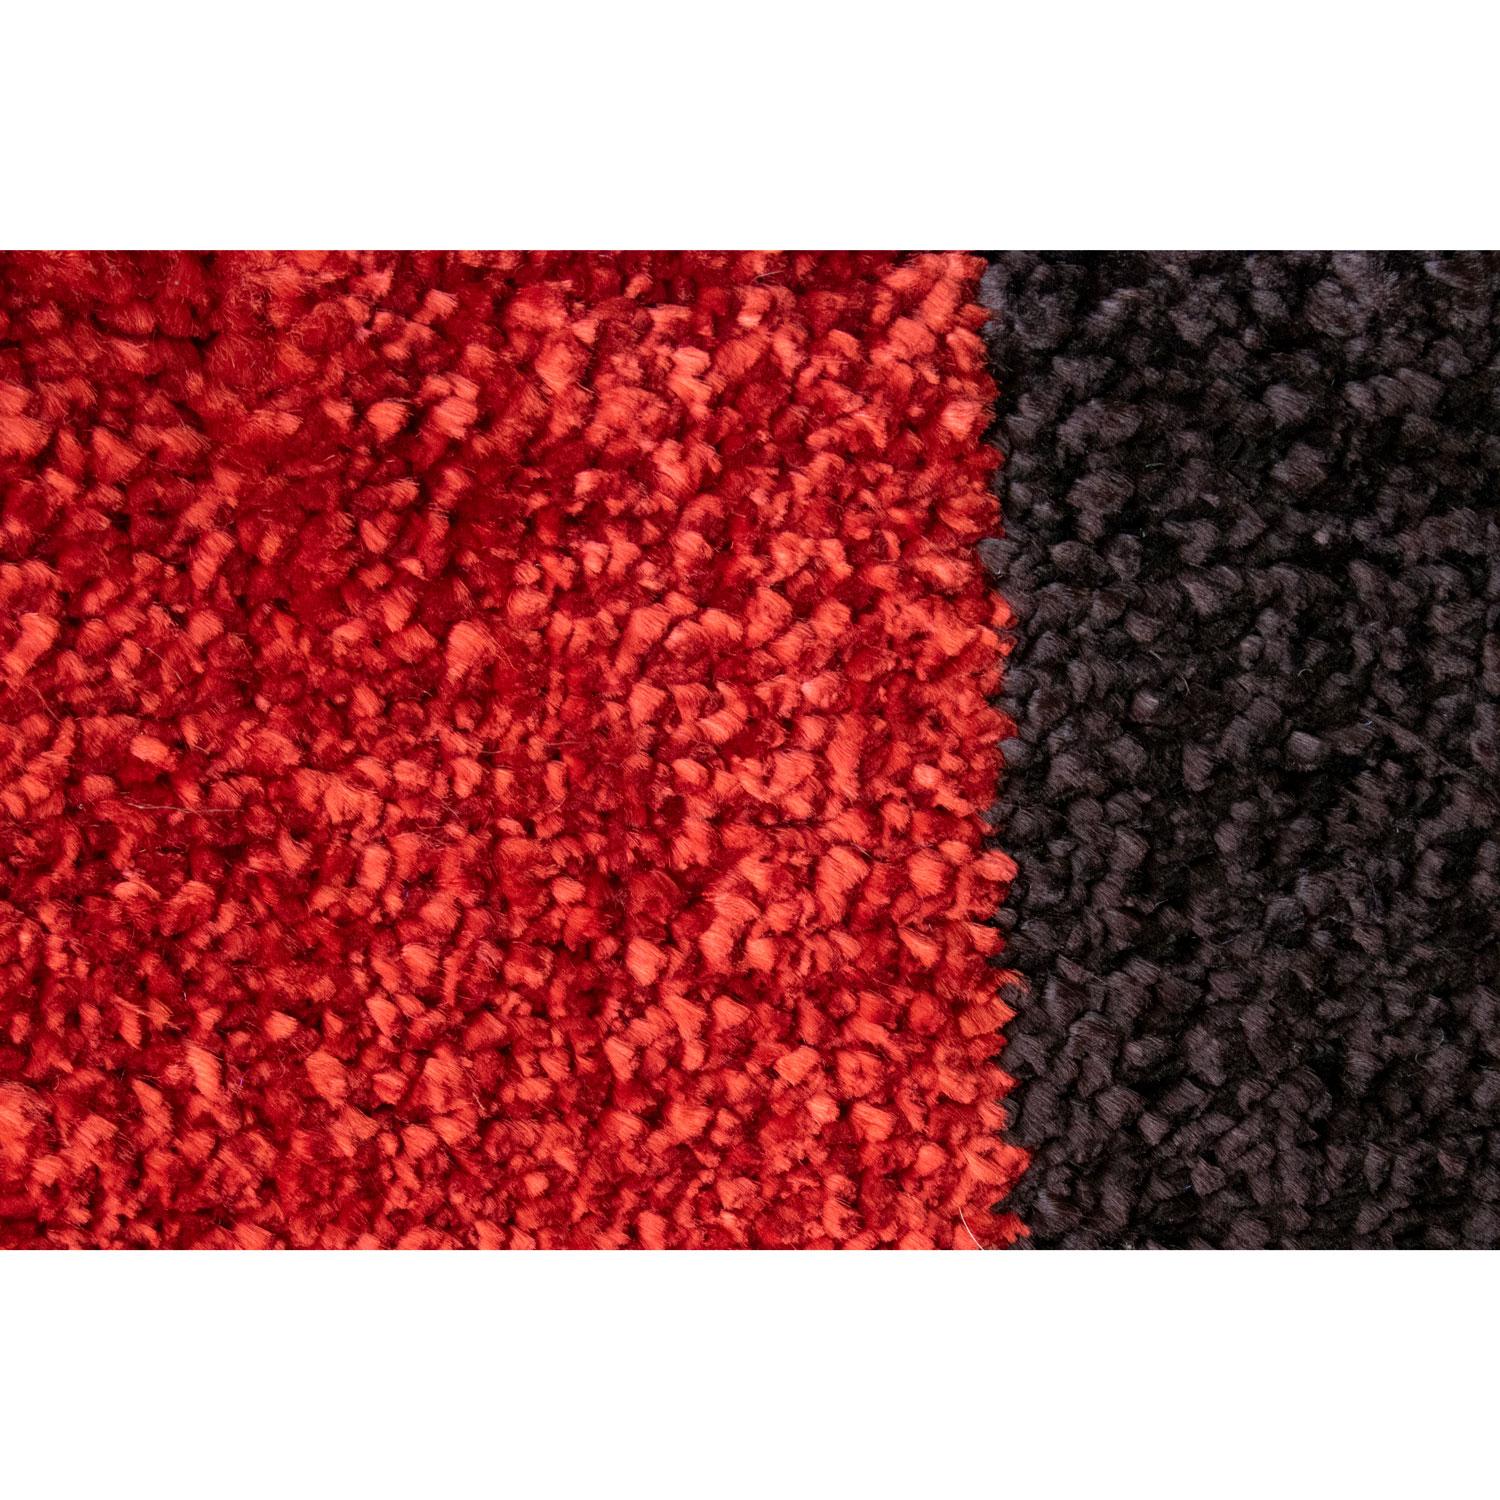 Hand-Woven Contemporary Luxury Shiny Red Brown Runner Rug by Deanna Comellini 70x240 cm For Sale